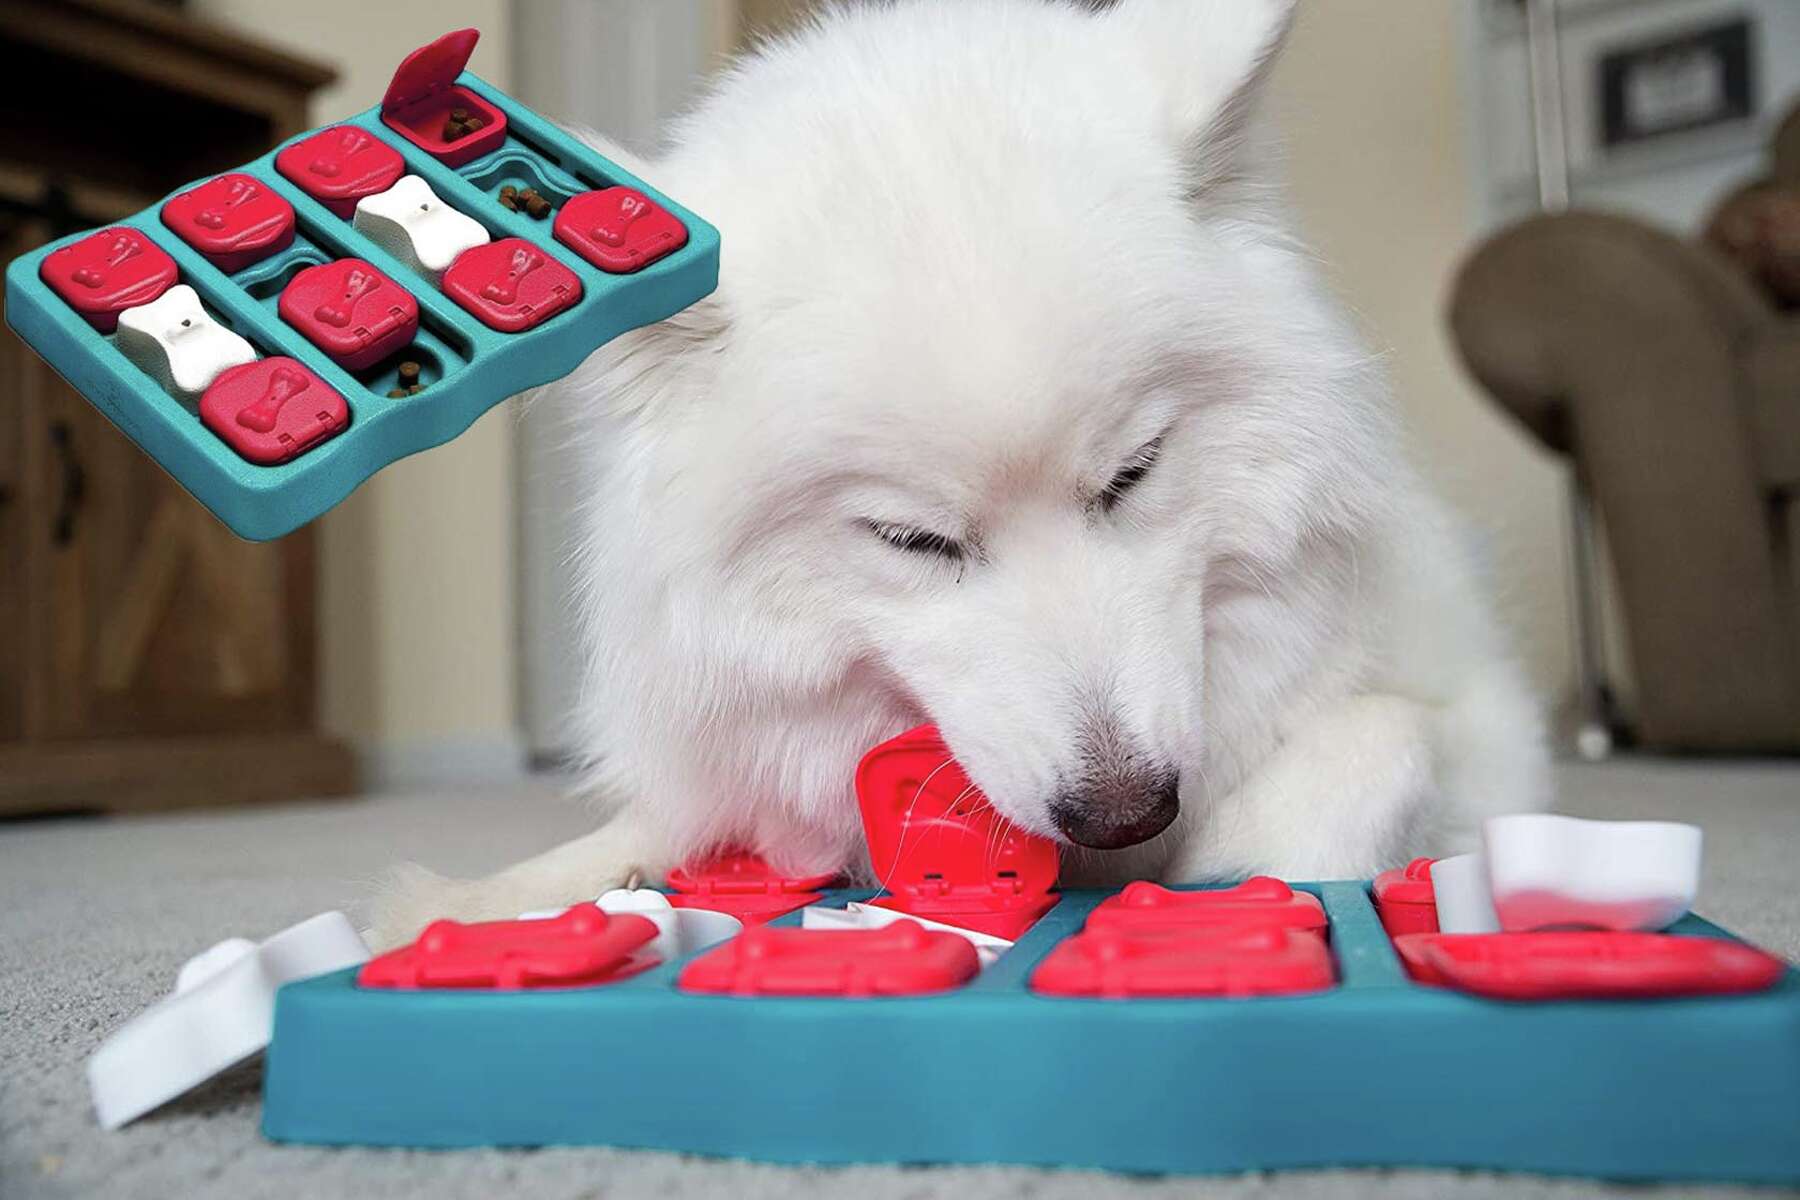 ONE PIX Dog Puzzle Toys, Level 3 in 1 Interactive Dog Toys for Smart Dogs,  Dog